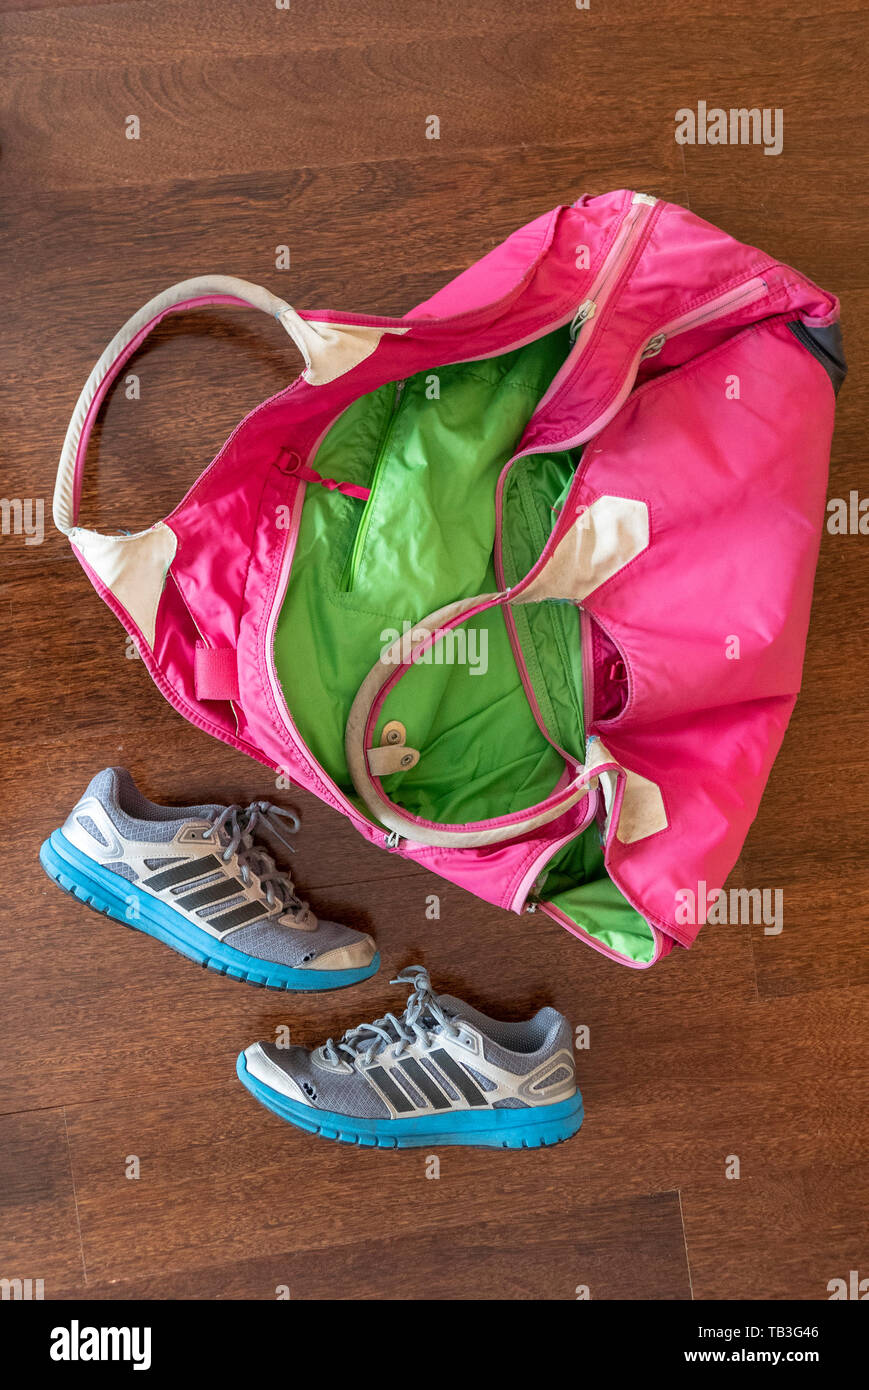 Worn pink gym bag and blue Adidas sneakers Stock Photo - Alamy